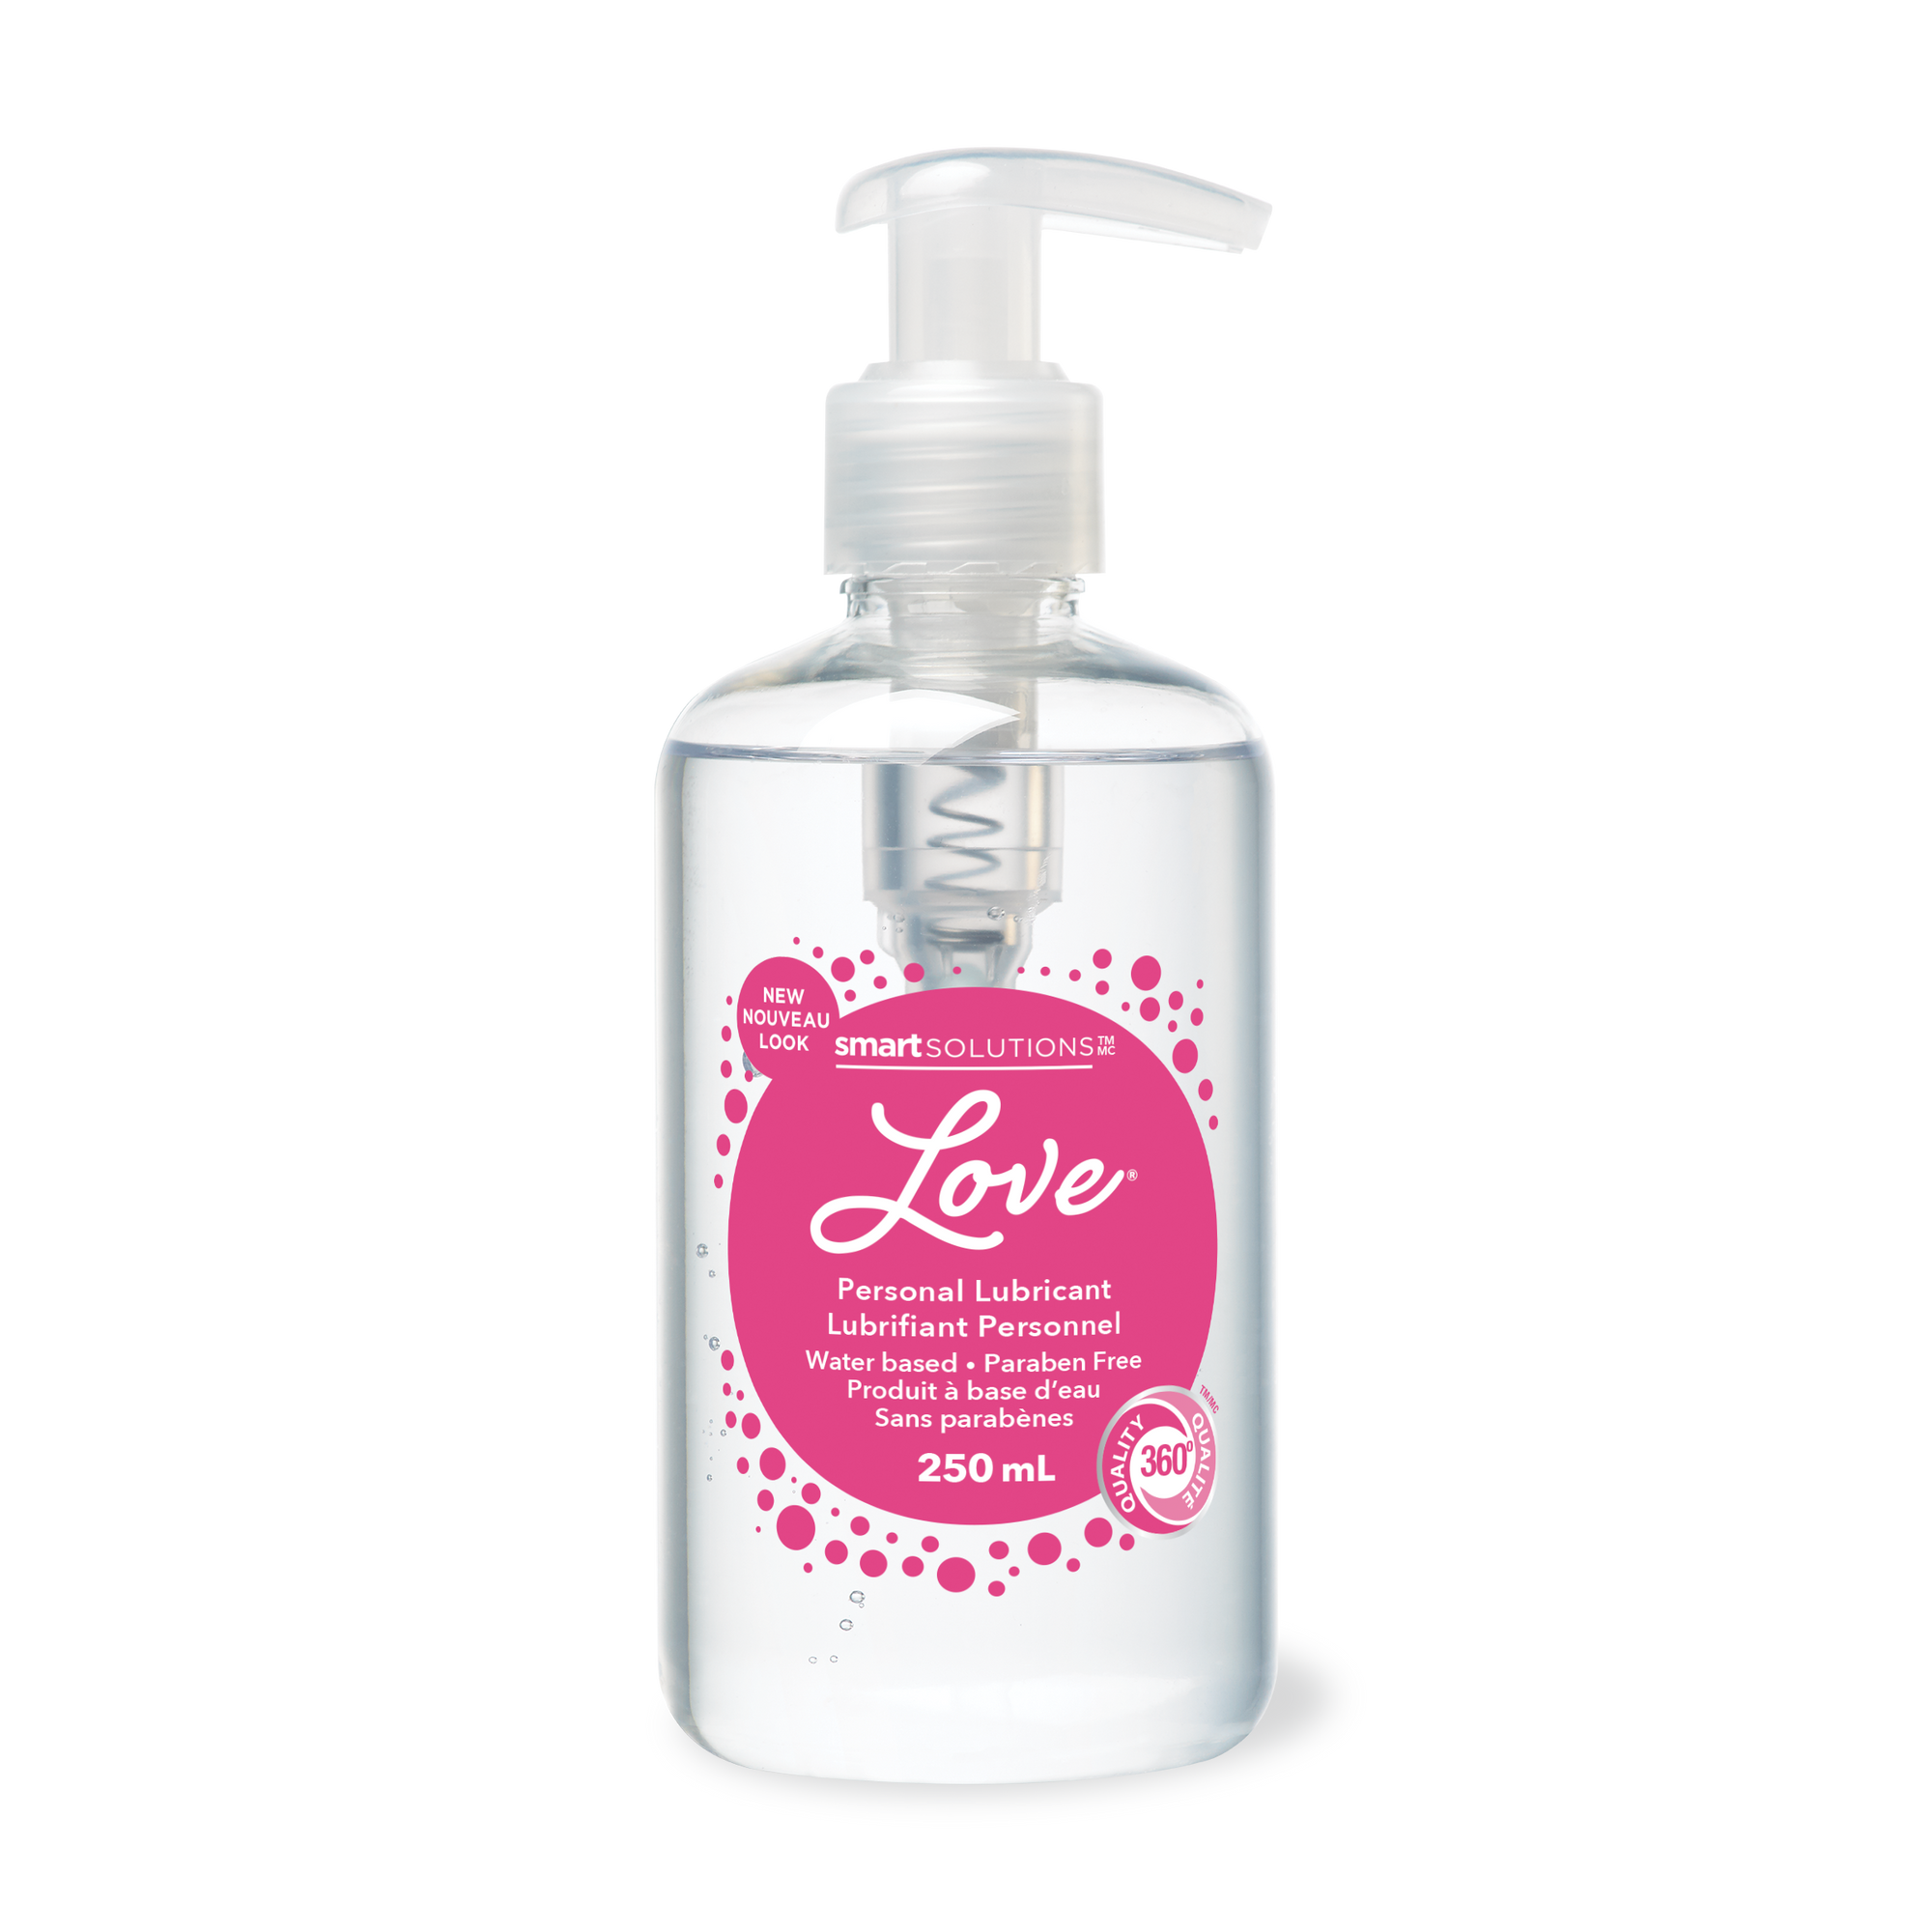 SS1207 Love Personal Lubricant Bottle